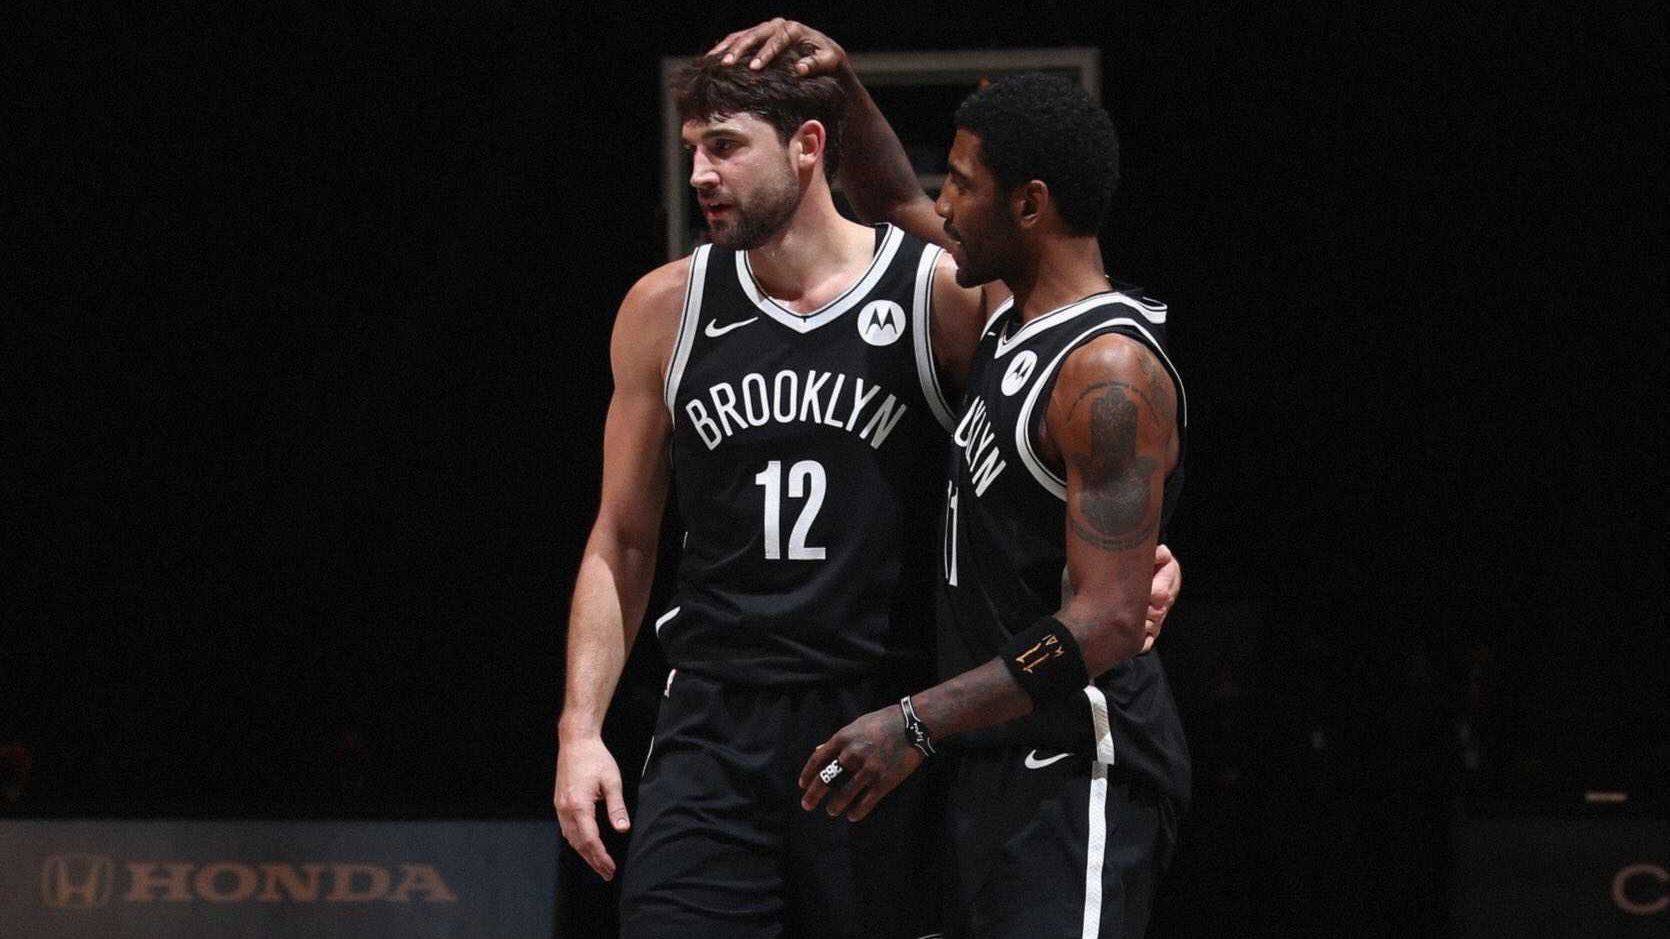 Brooklyn Nets defeats Miami Heat, with Kevin Durant scoring 31 points